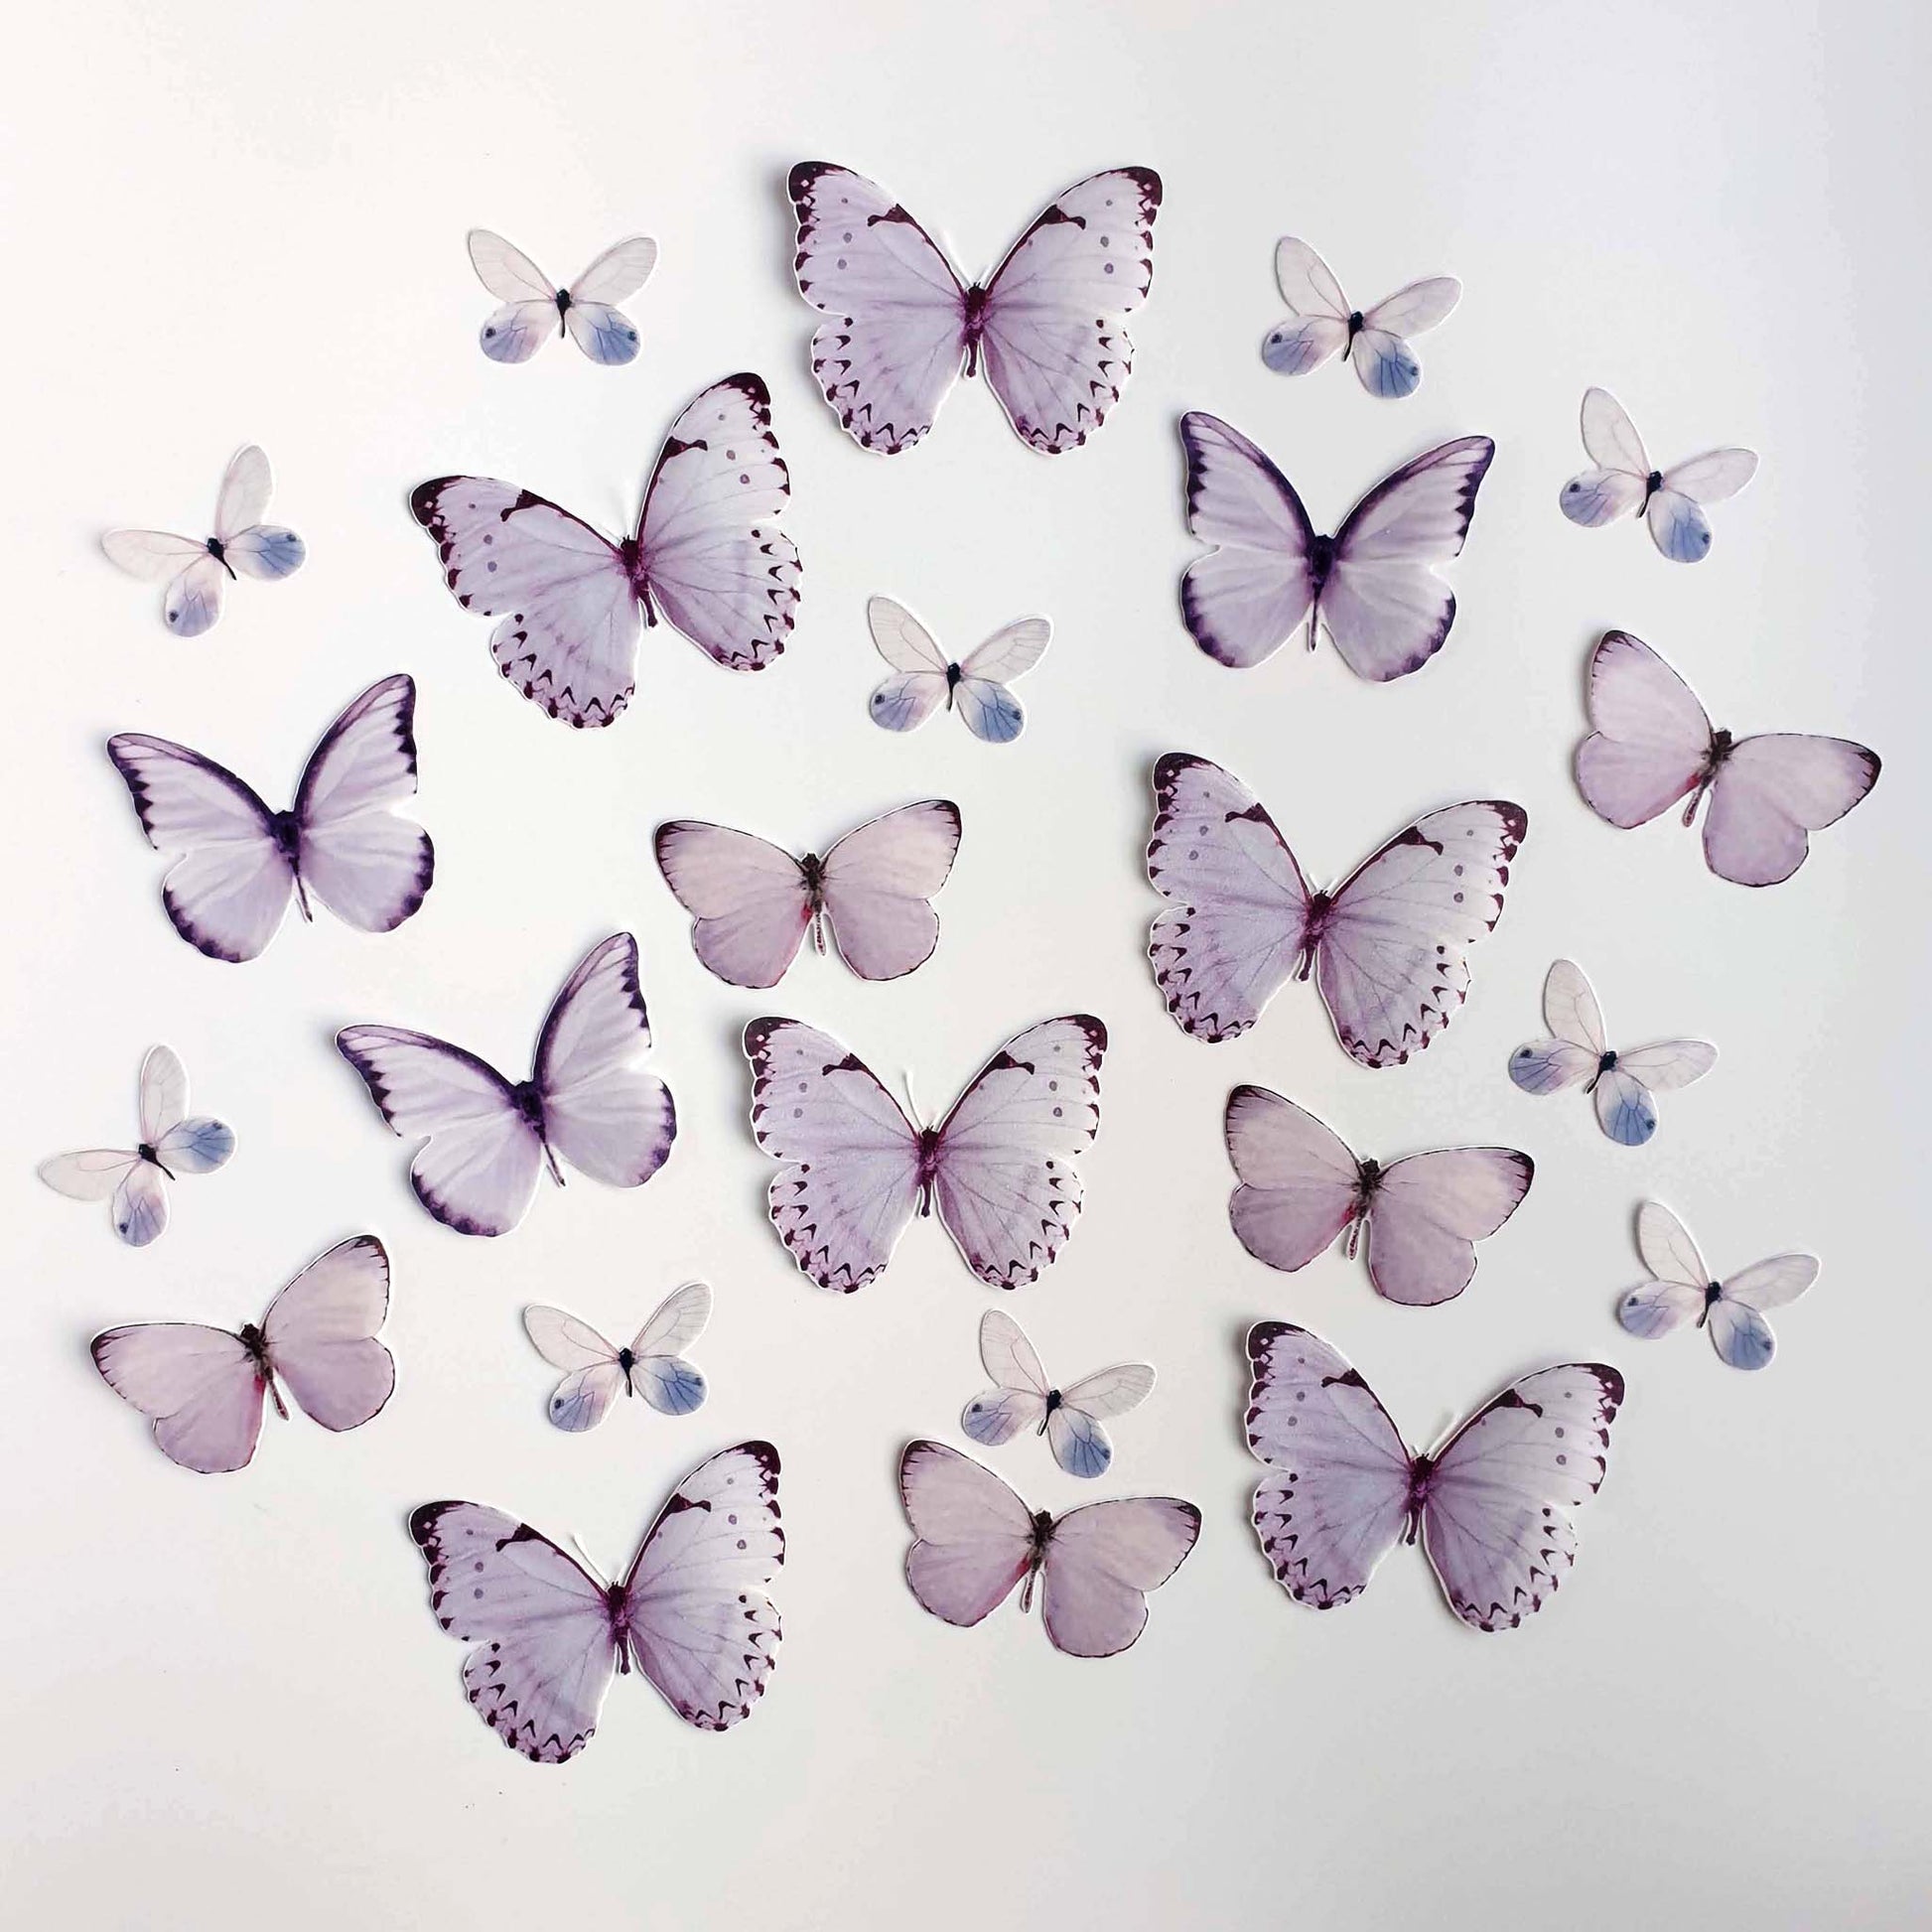 These wafer butterflies are simply magnificent and will make ordinary desserts extraordinary.  The pack contains 24 Light Purple colour wafer butterflies, precut and ready to use.    They come in 3 sizes;  10 small Butterflies: wingspan of approximately 3 cm (1.2')  8 Medium Butterflies: wingspan of approximately 5 cm (2')  6 Large Butterflies: wingspan of approximately 6 cm (2.4')